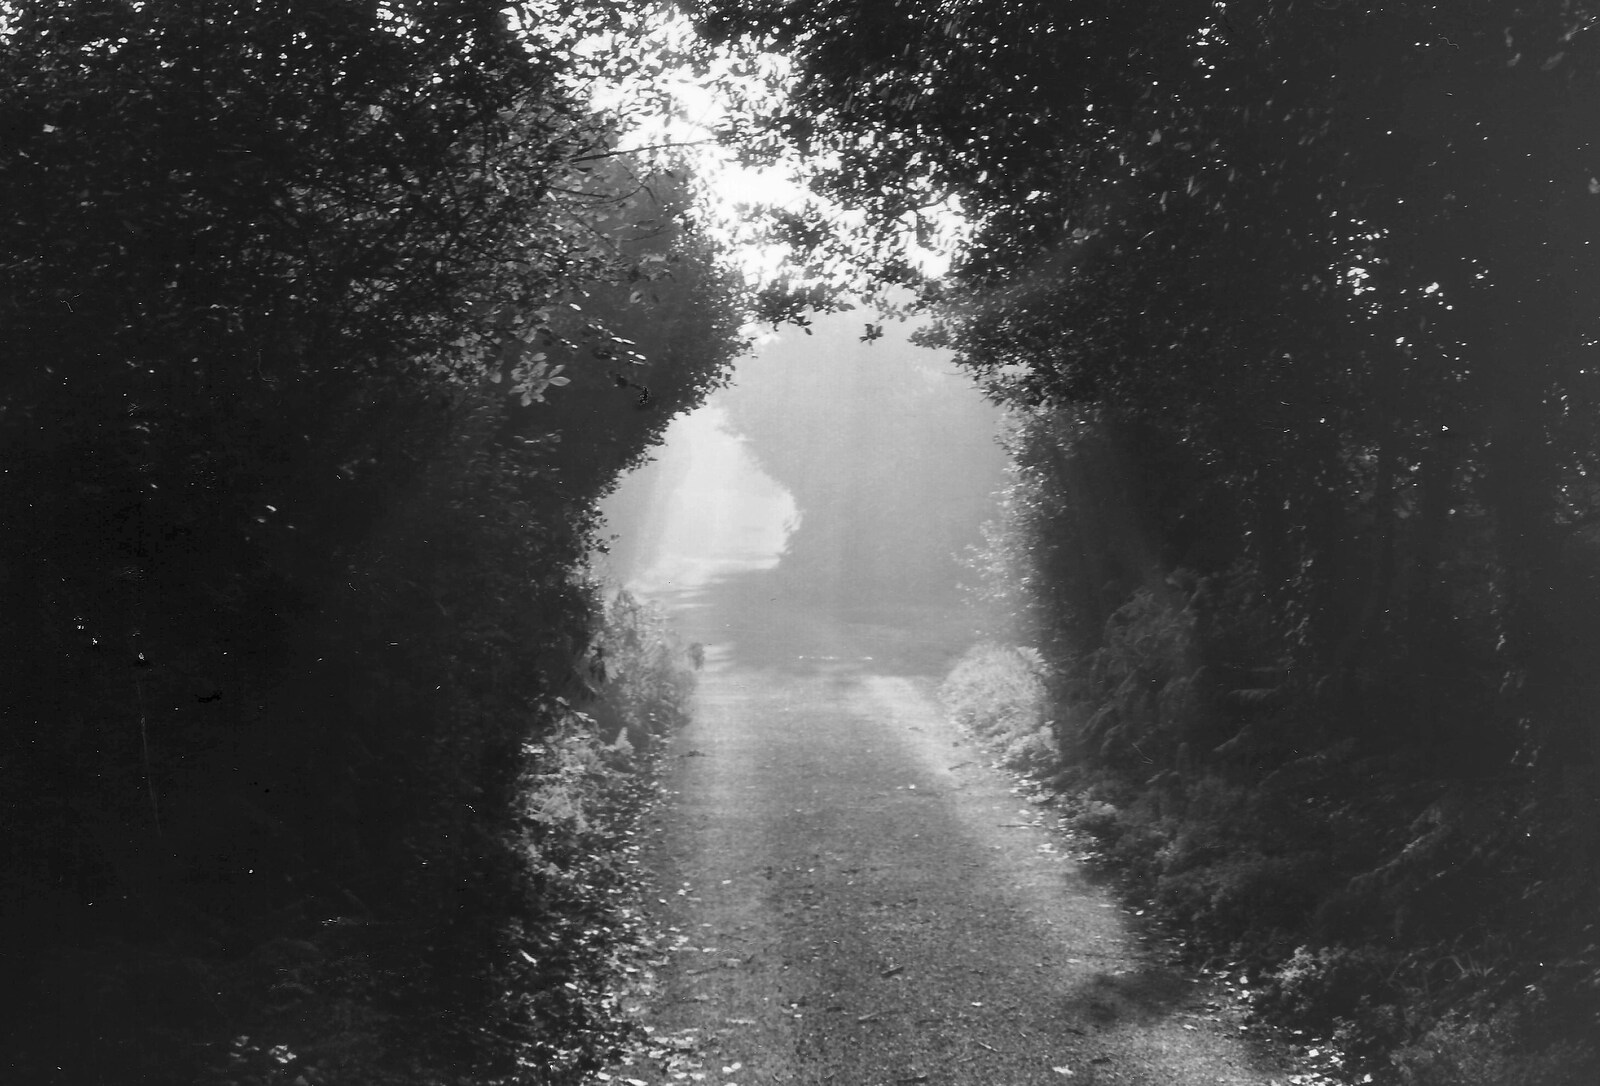 A misty morning on Meadow Way, on the way to the station from Learning Black-and-White Photography, Brockenhurst College, Hampshire - 10th March 1985